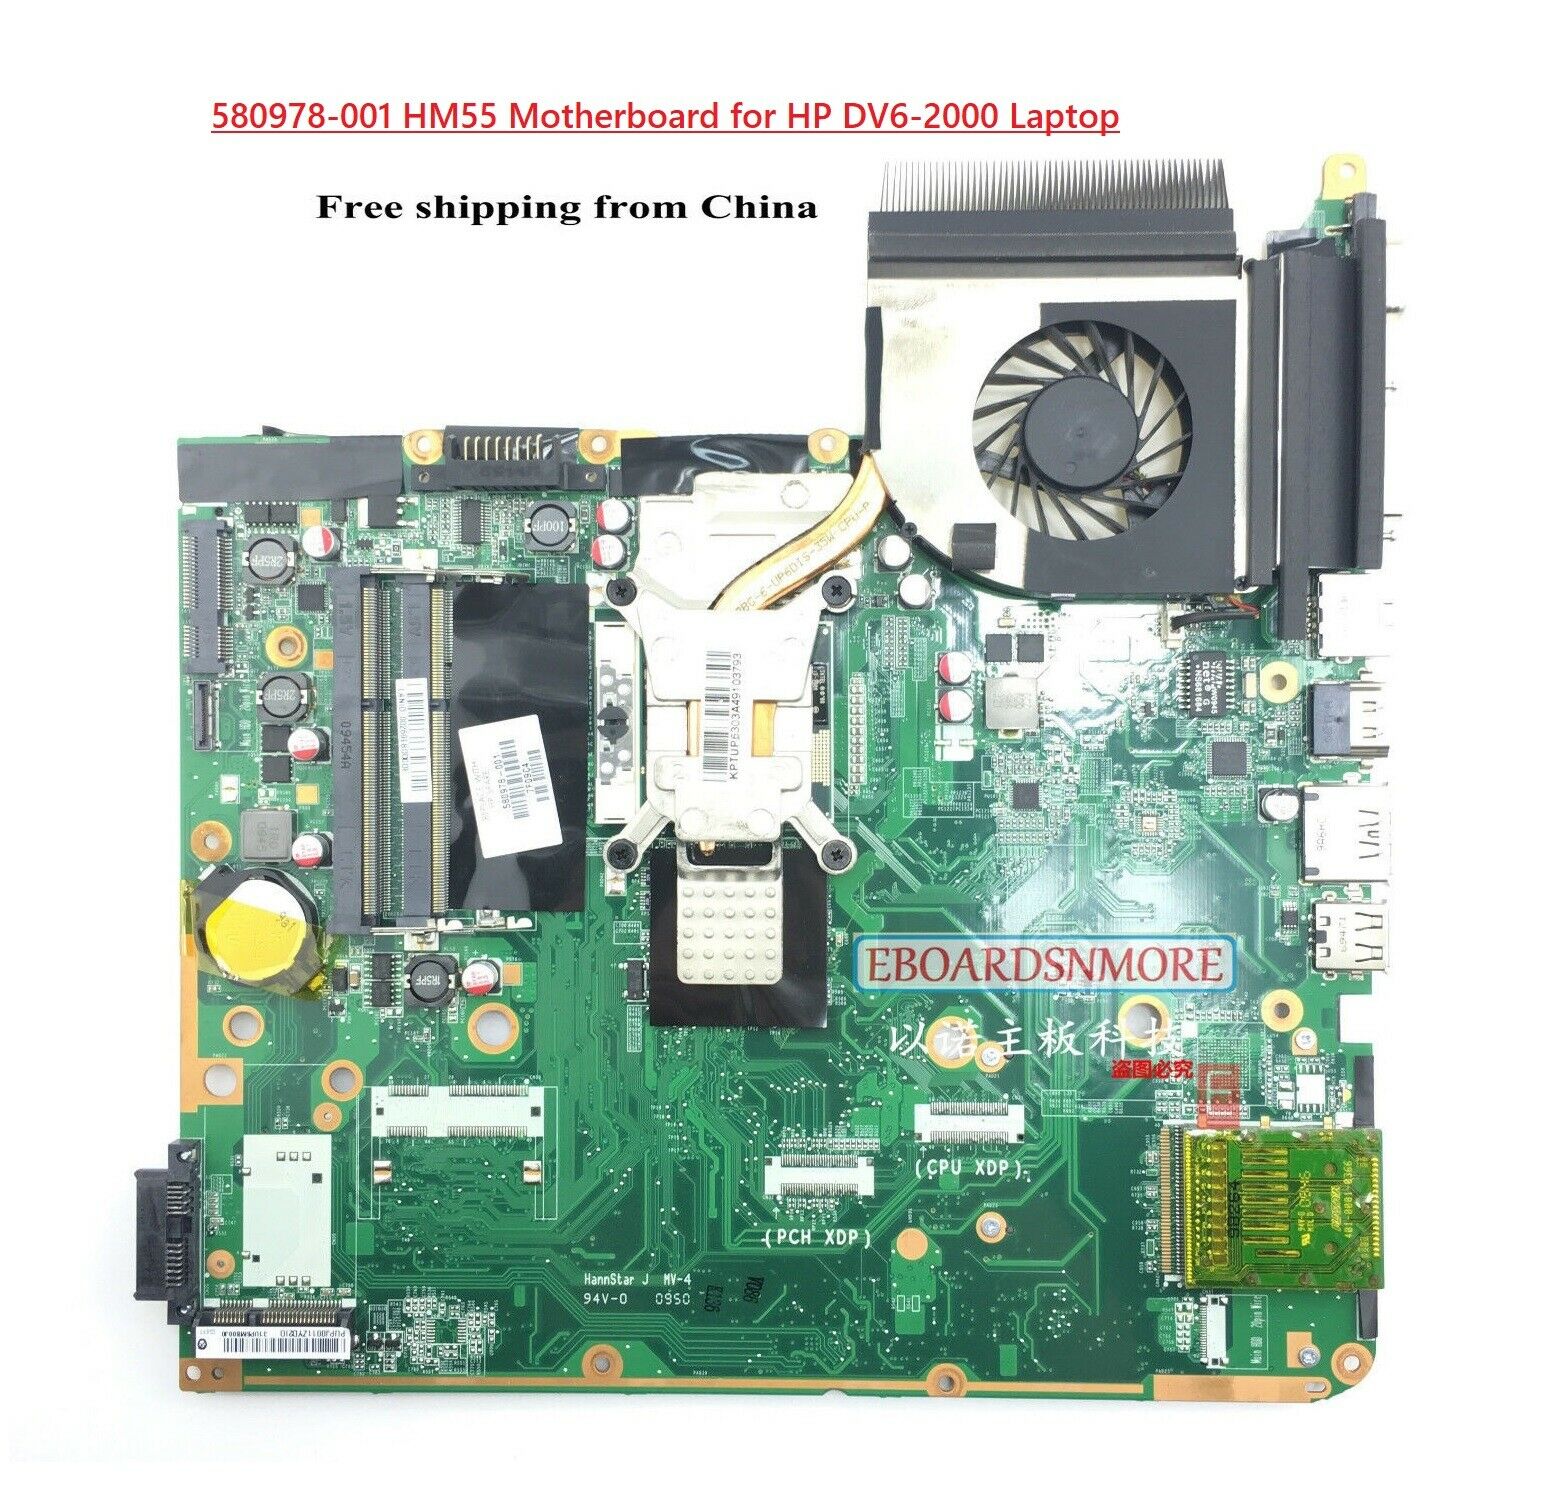 580978-001 HM55 Motherboard for HP DV6-2000 Laptop, Intel Video, i3 i5 only, A Compatible CPU Brand: Intel